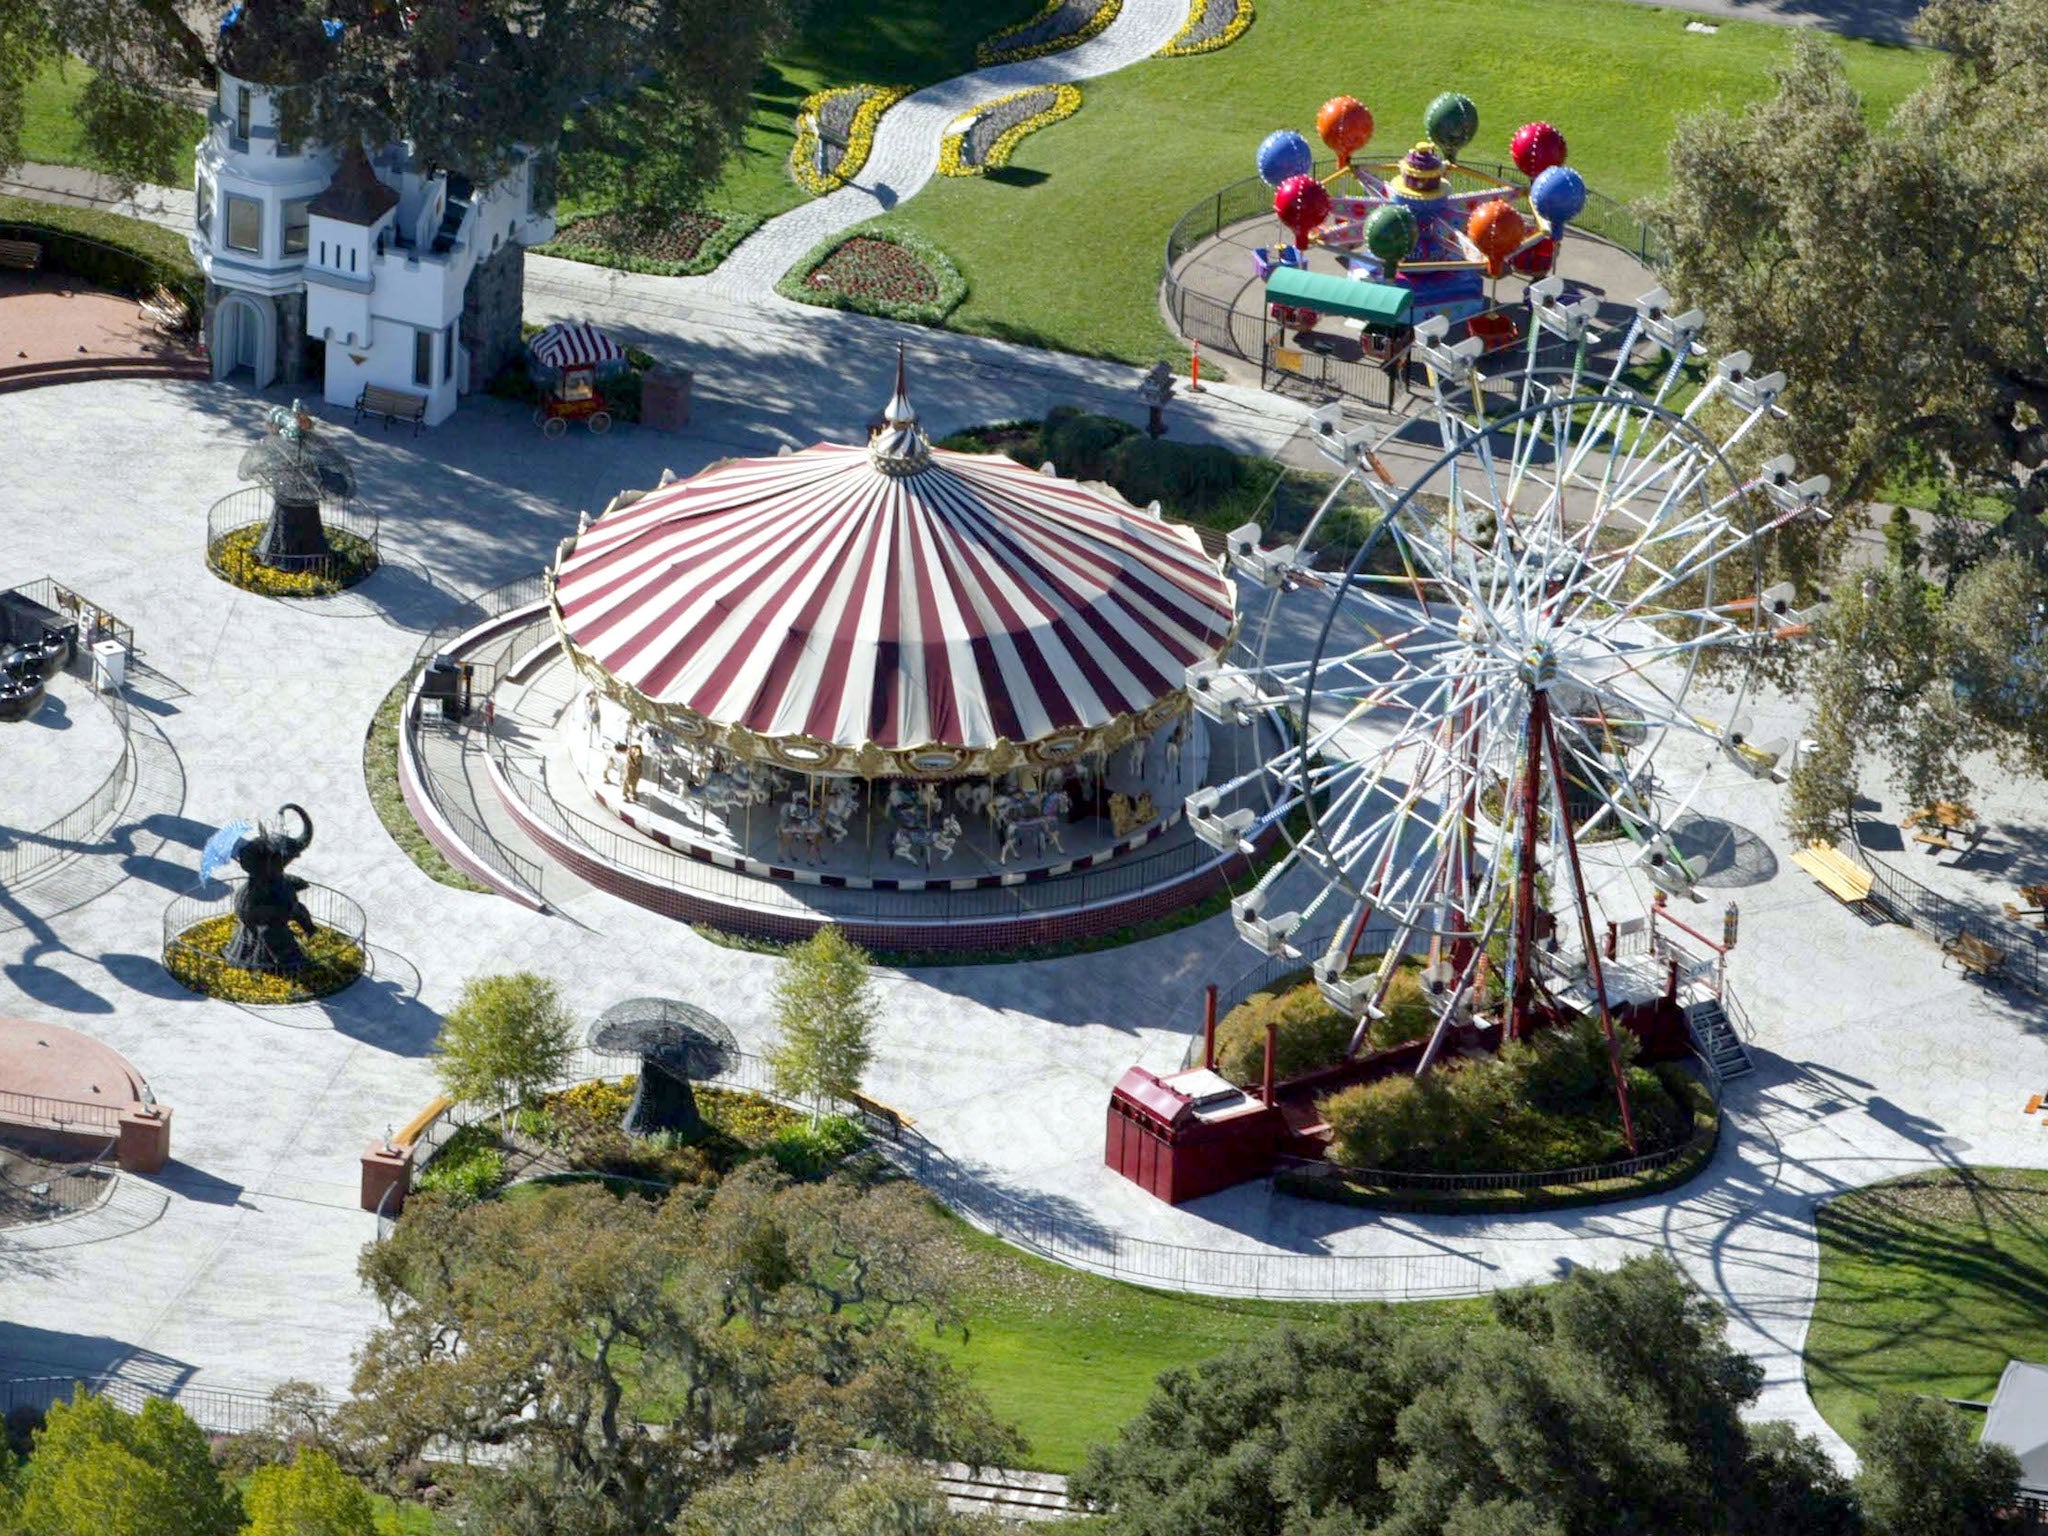 The outdoor fairground at Neverland